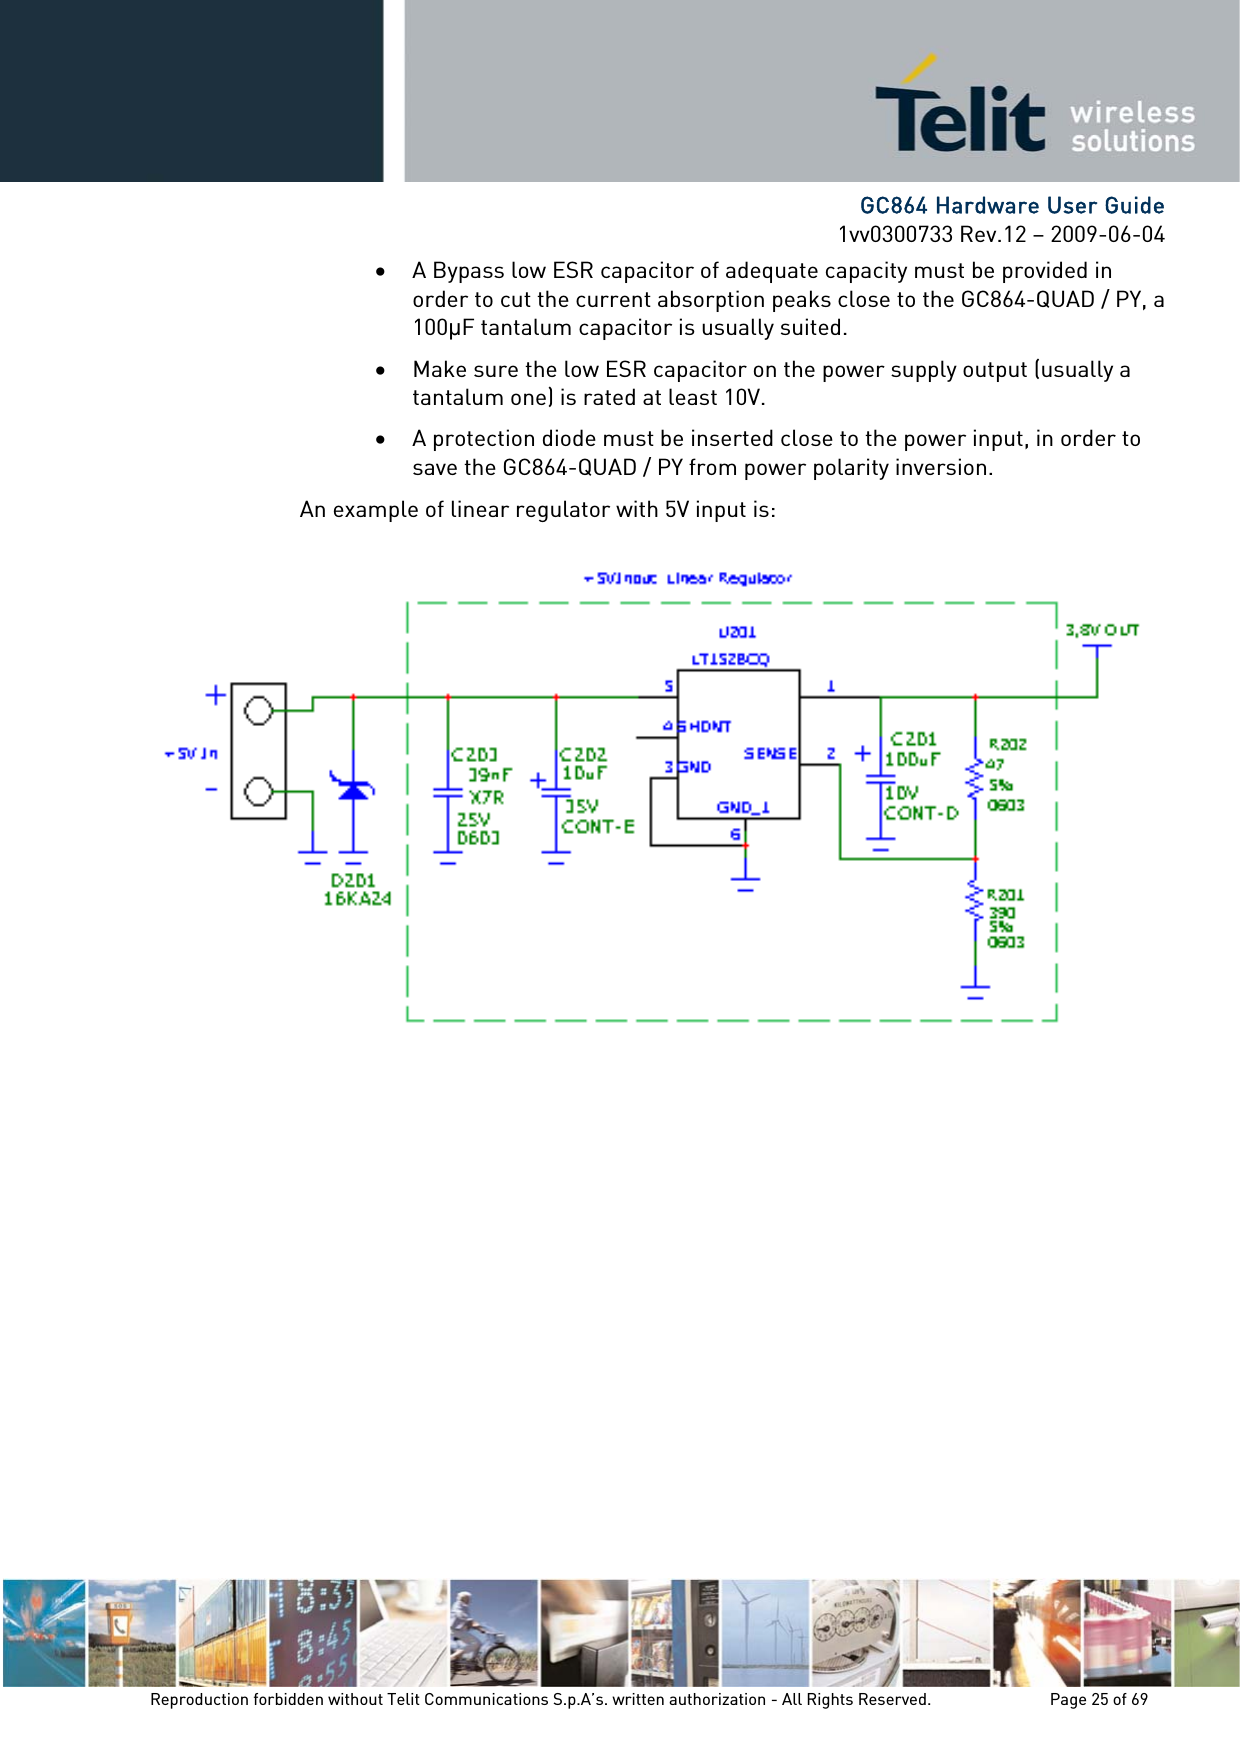      GC864 Hardware User Guide 1vv0300733 Rev.12 – 2009-06-04 • A Bypass low ESR capacitor of adequate capacity must be provided in order to cut the current absorption peaks close to the GC864-QUAD / PY, a 100F tantalum capacitor is usually suited. • Make sure the low ESR capacitor on the power supply output (usually a tantalum one) is rated at least 10V. • A protection diode must be inserted close to the power input, in order to save the GC864-QUAD / PY from power polarity inversion. An example of linear regulator with 5V input is:  Reproduction forbidden without Telit Communications S.p.A’s. written authorization - All Rights Reserved.    Page 25 of 69  